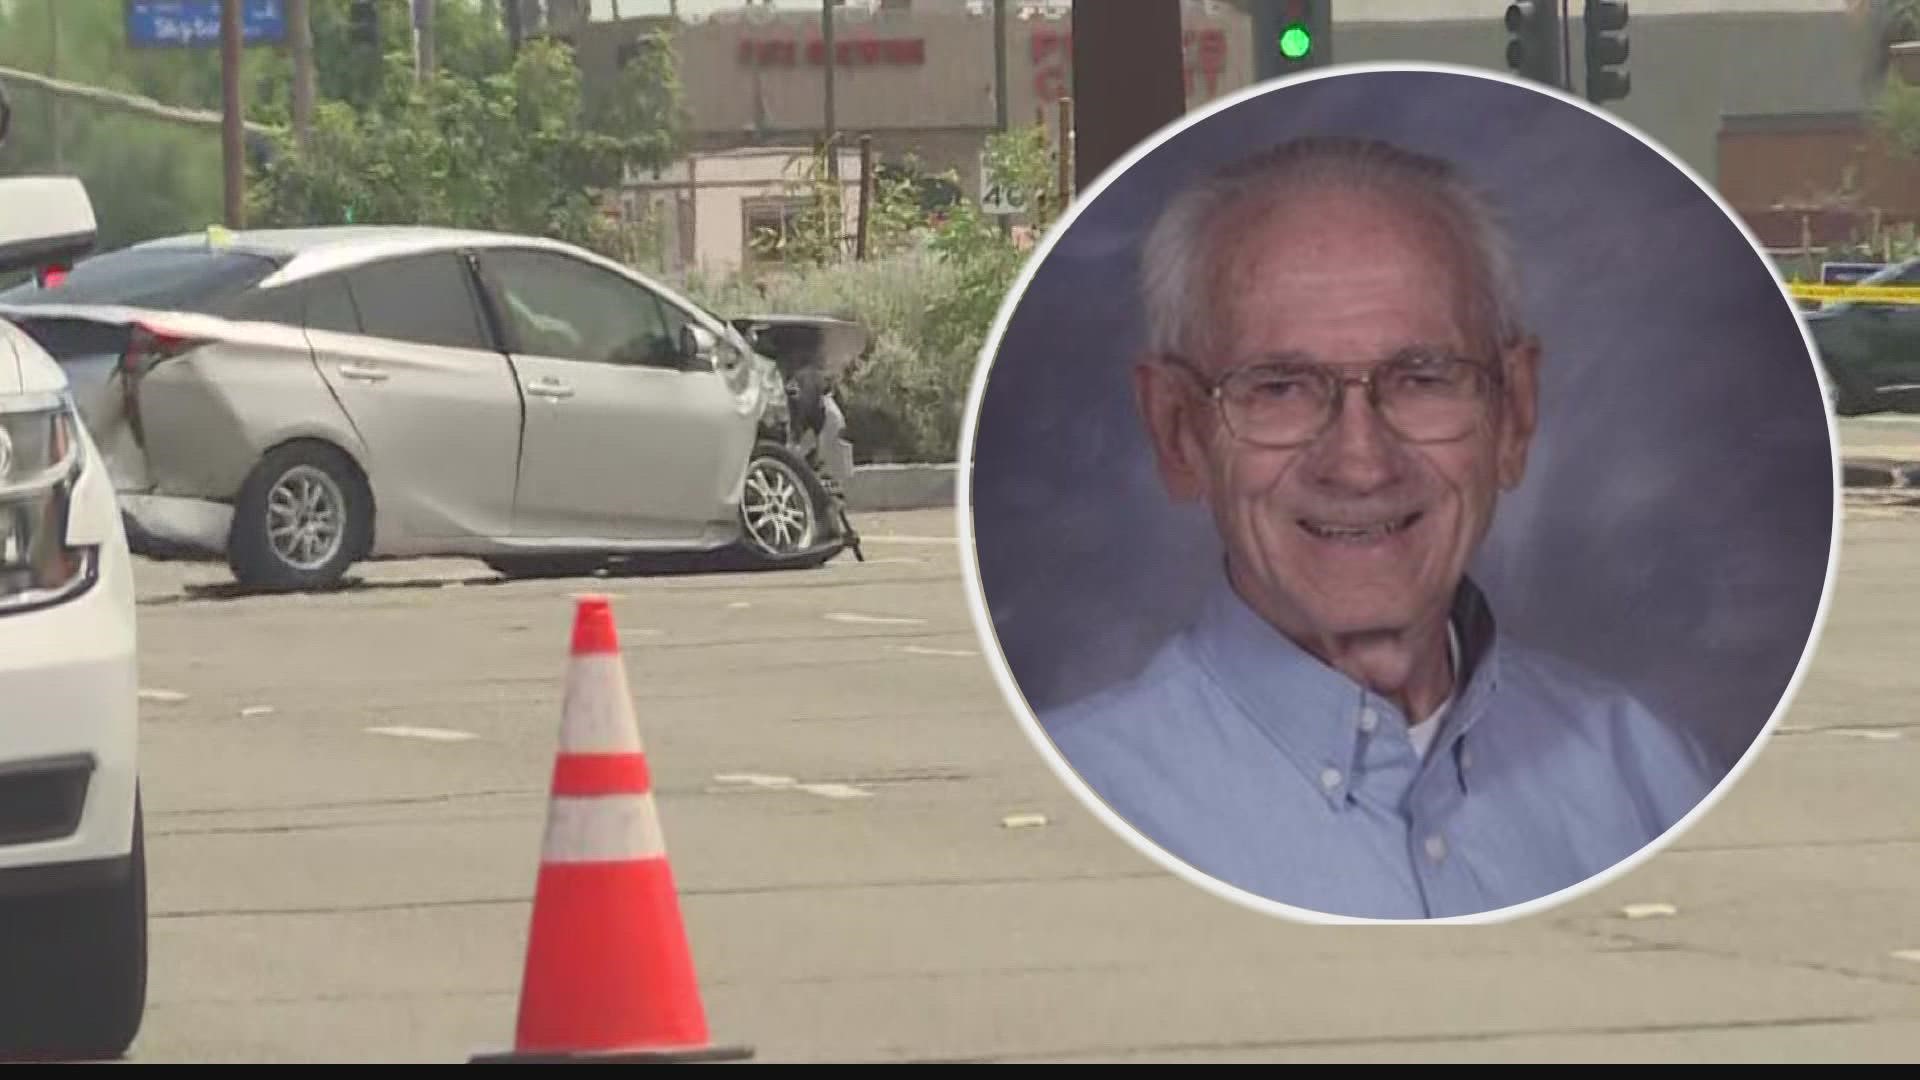 94-year-old man killed in a crash involving other vehicles including a post office truck over the weekend.